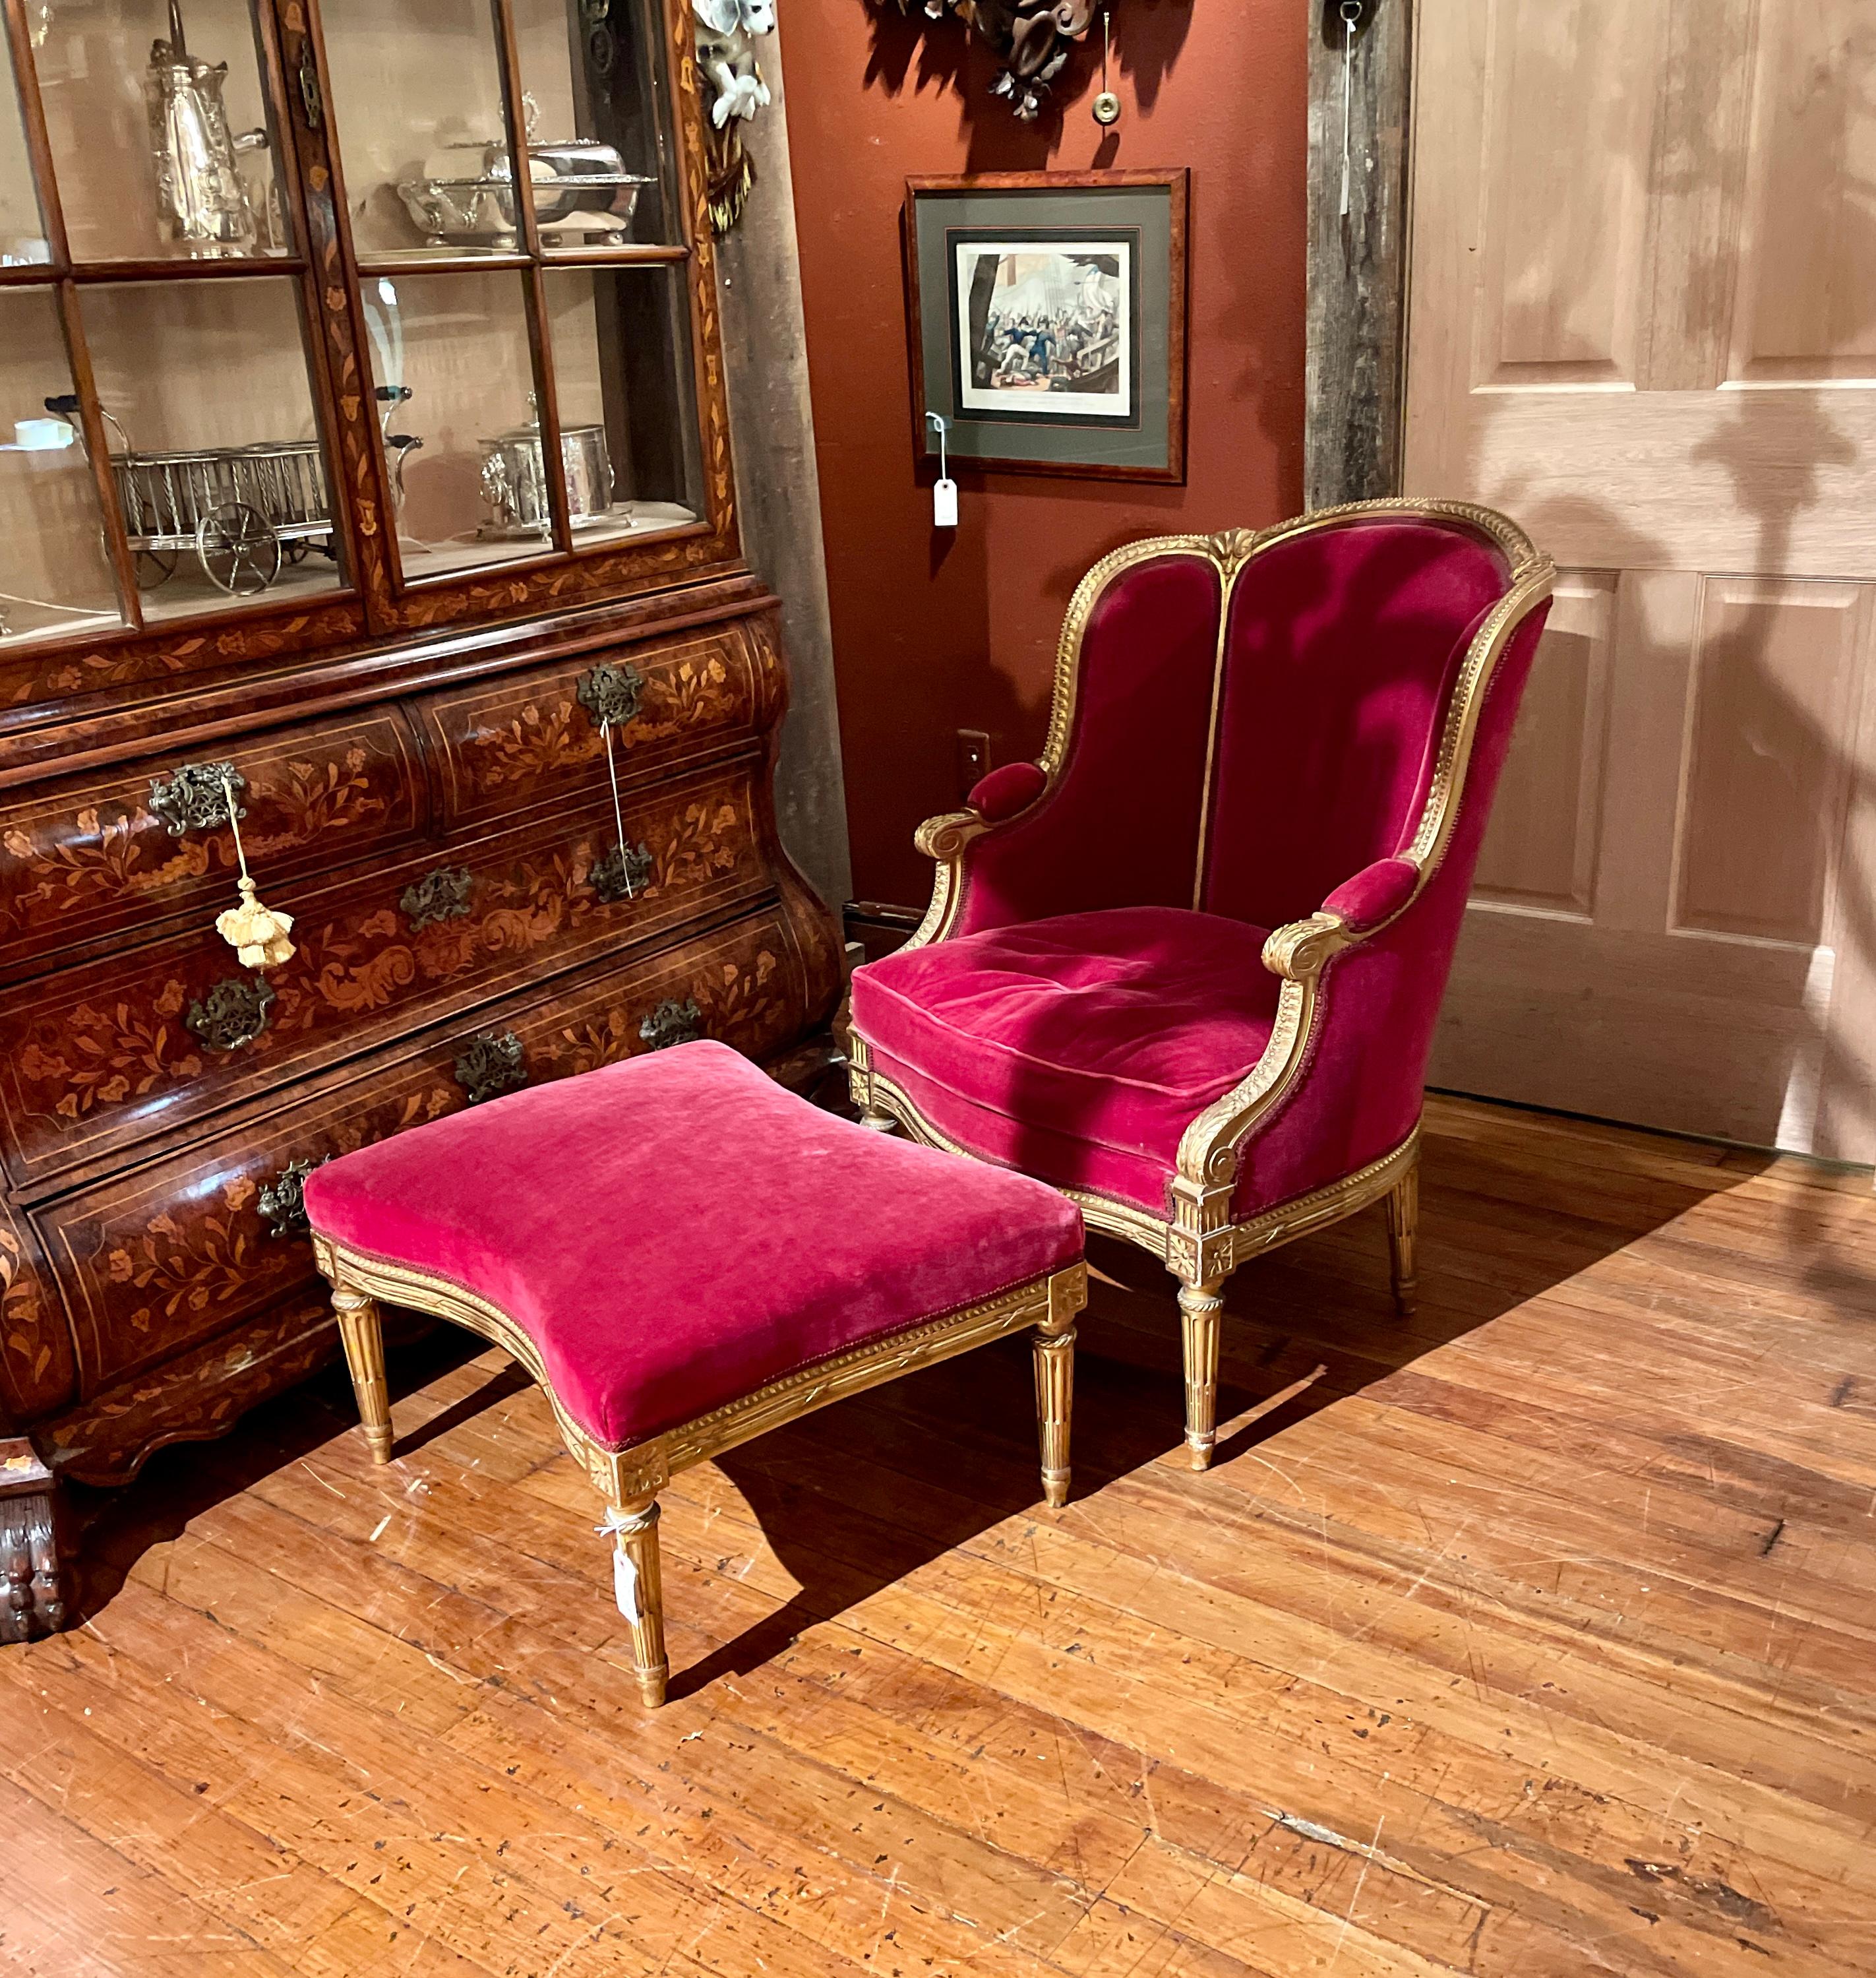 Upholstery Antique French Louis XVI Chaise Lounge and Ottoman, circa 1890 For Sale